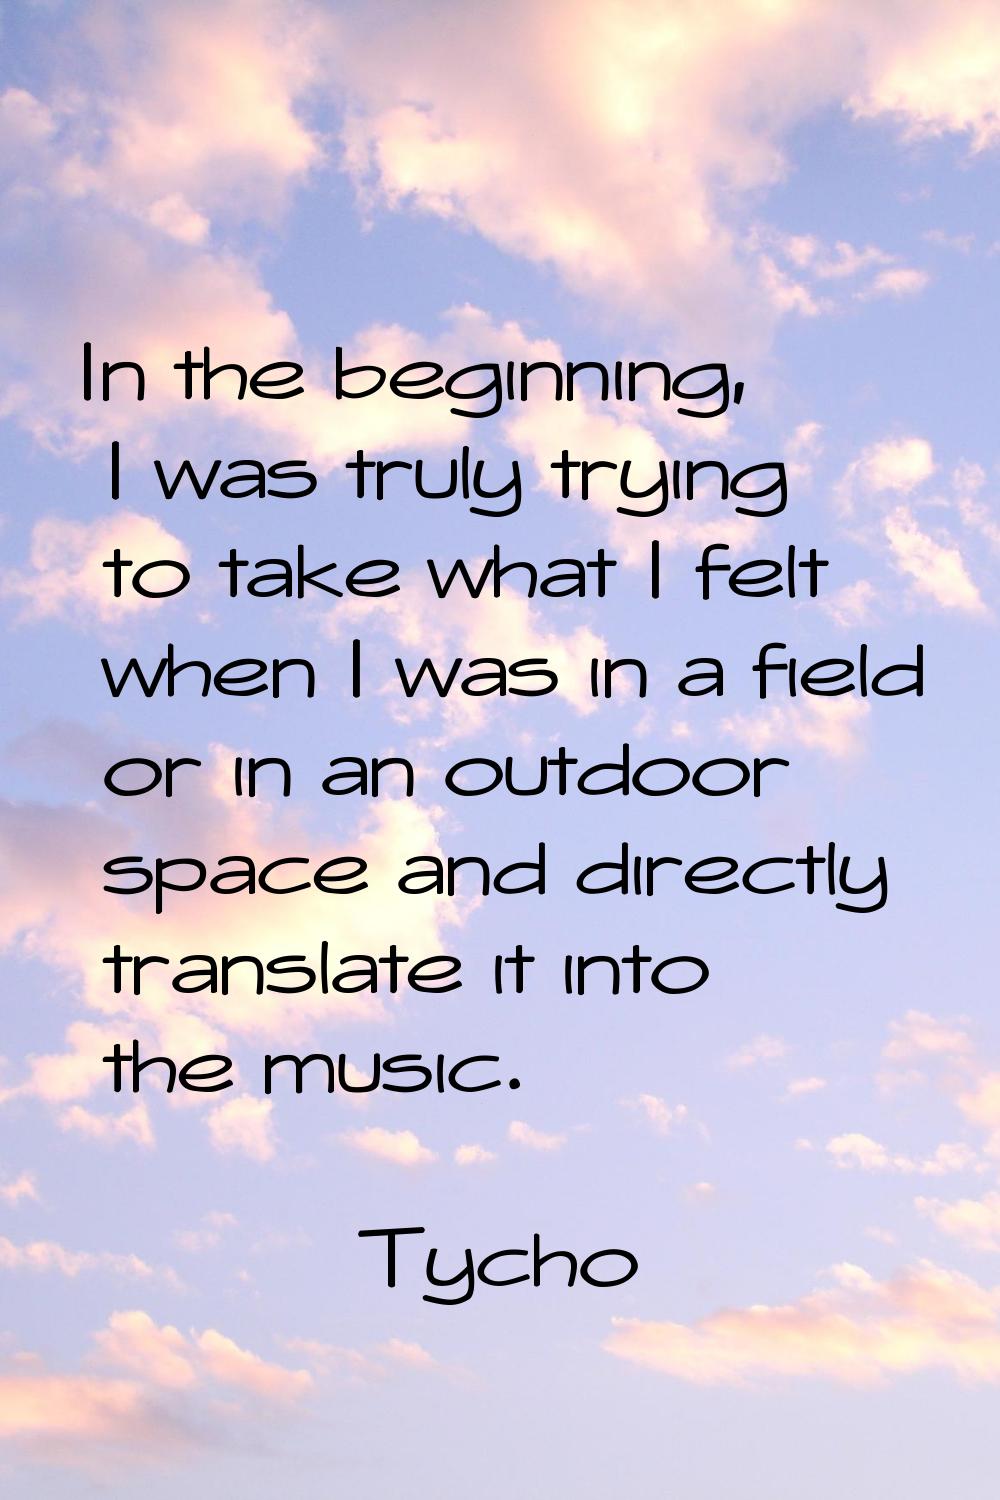 In the beginning, I was truly trying to take what I felt when I was in a field or in an outdoor spa